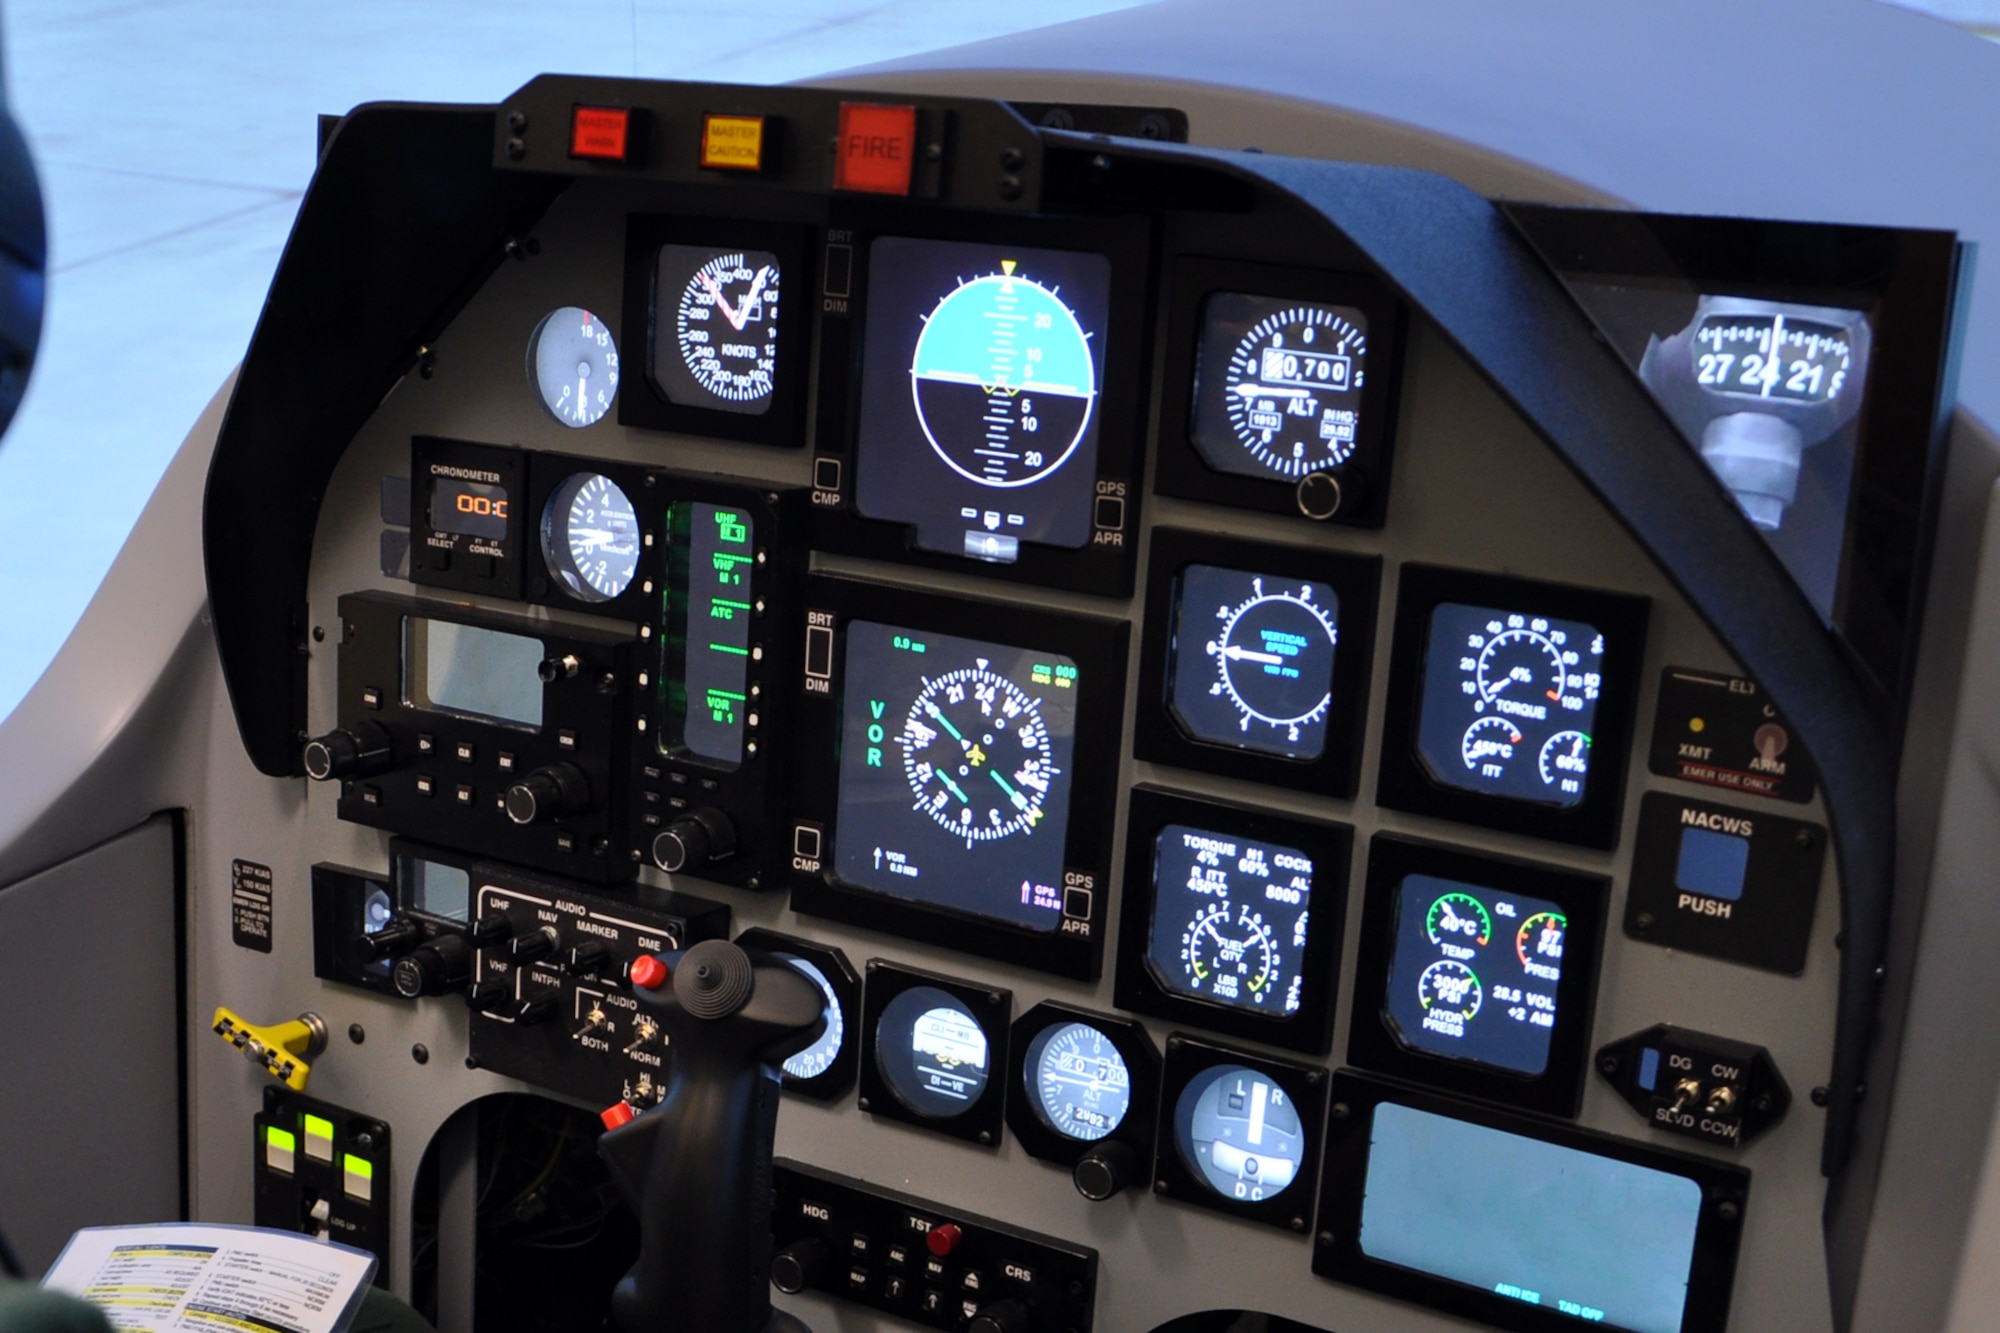 The new T-6 Texan II simulator instrument panel uses a single flat panel monitor and software to recreate the look and feel with digital displays and gauges. (U.S. Air Force photo/Staff Sgt. Clinton Atkins)